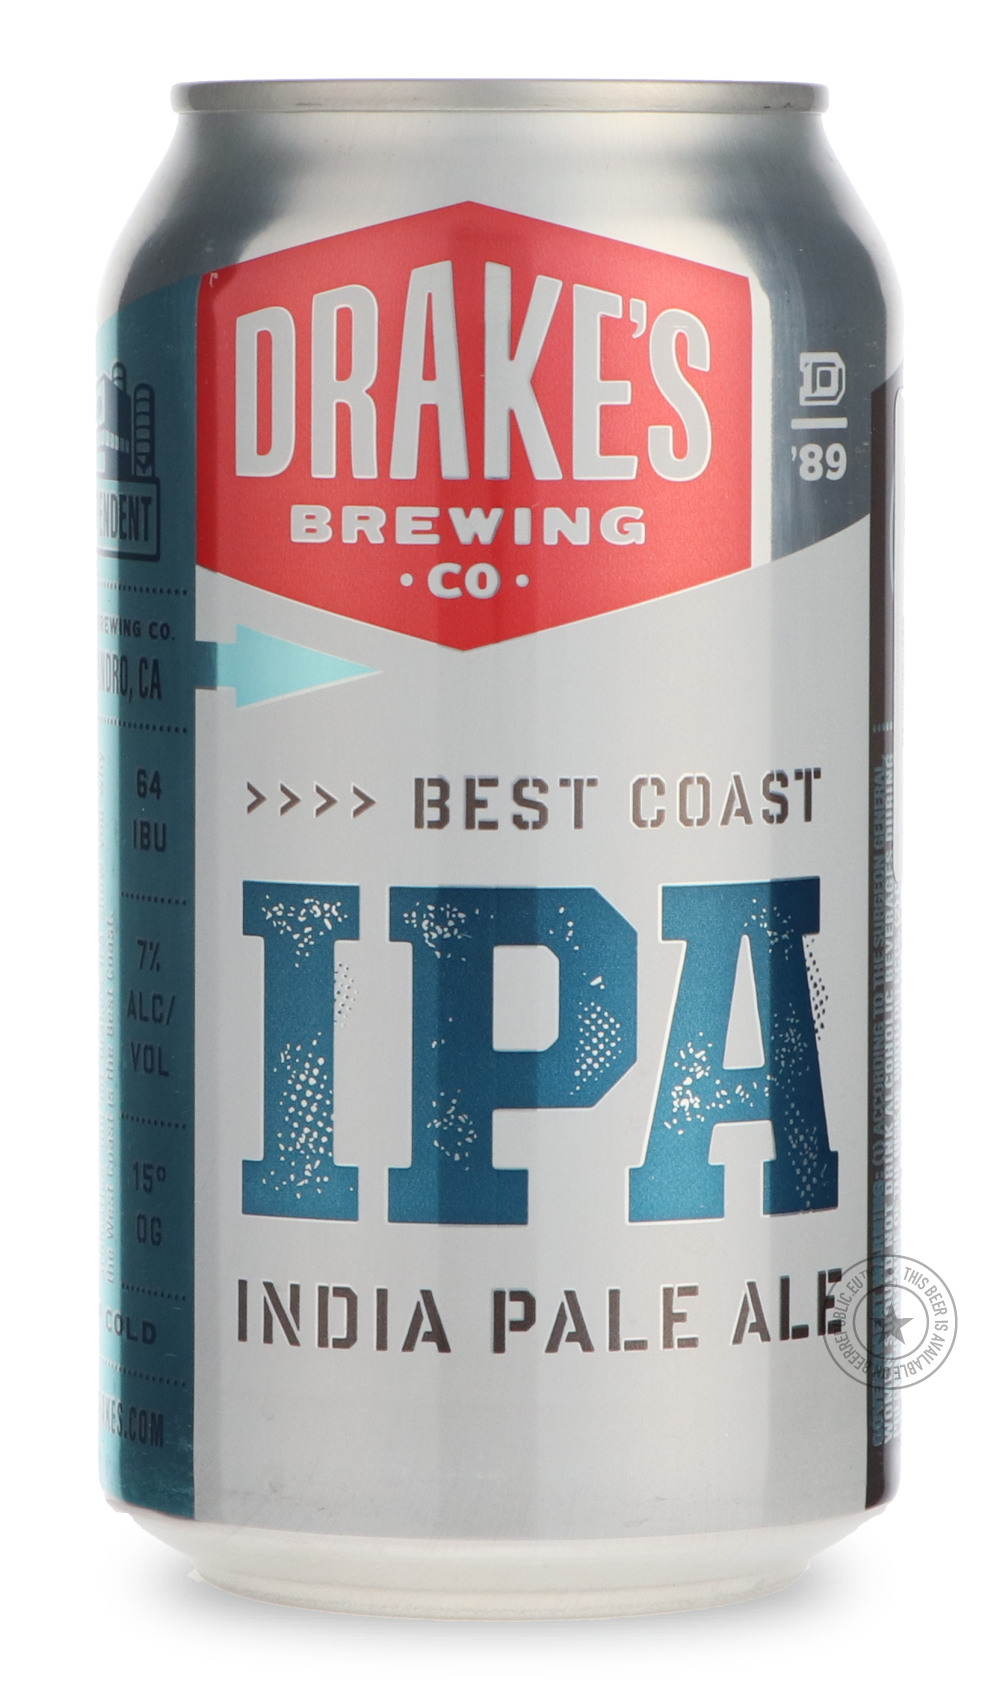 -Drake's- Best Coast IPA-IPA- Only @ Beer Republic - The best online beer store for American & Canadian craft beer - Buy beer online from the USA and Canada - Bier online kopen - Amerikaans bier kopen - Craft beer store - Craft beer kopen - Amerikanisch bier kaufen - Bier online kaufen - Acheter biere online - IPA - Stout - Porter - New England IPA - Hazy IPA - Imperial Stout - Barrel Aged - Barrel Aged Imperial Stout - Brown - Dark beer - Blond - Blonde - Pilsner - Lager - Wheat - Weizen - Amber - Barley W